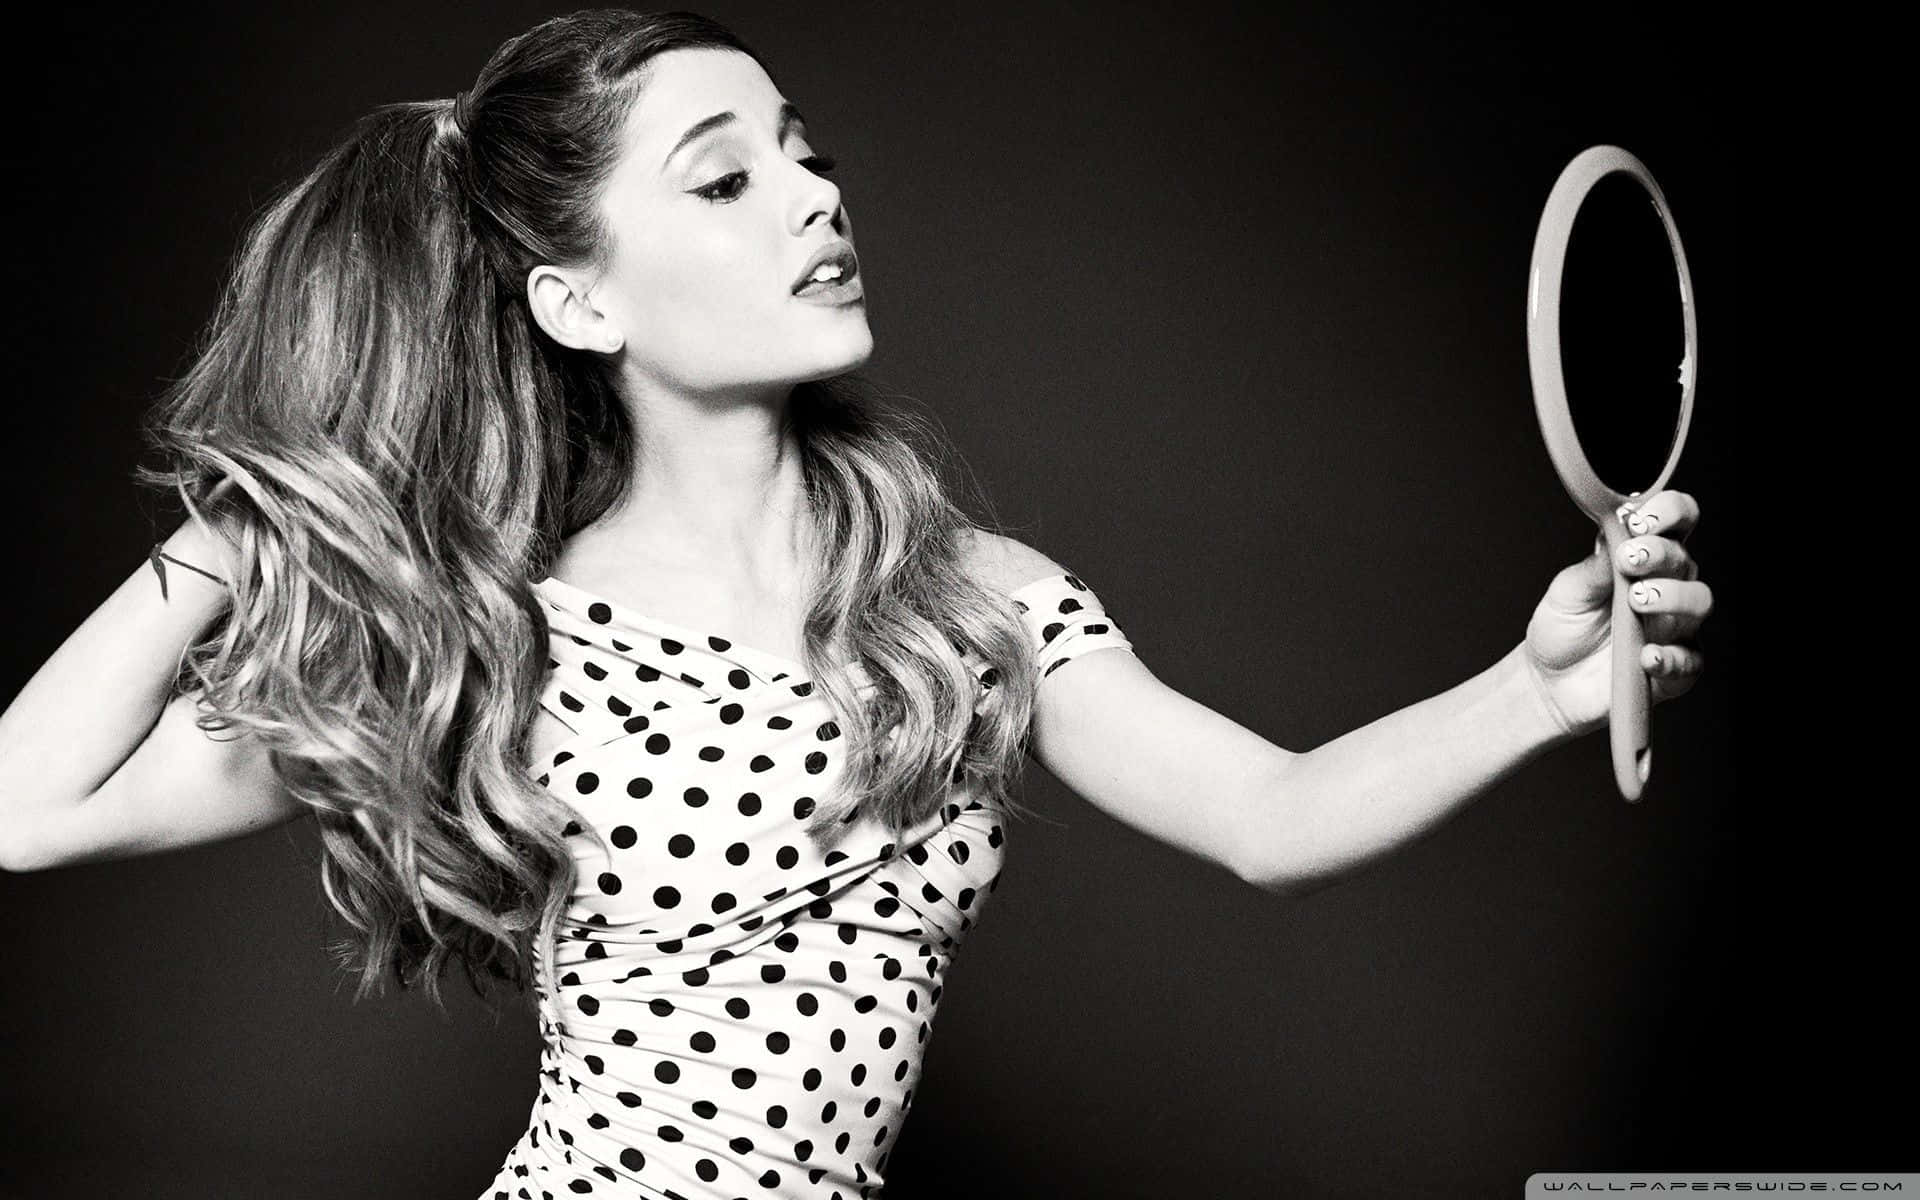 Ariana Grande displays her strong attitude.